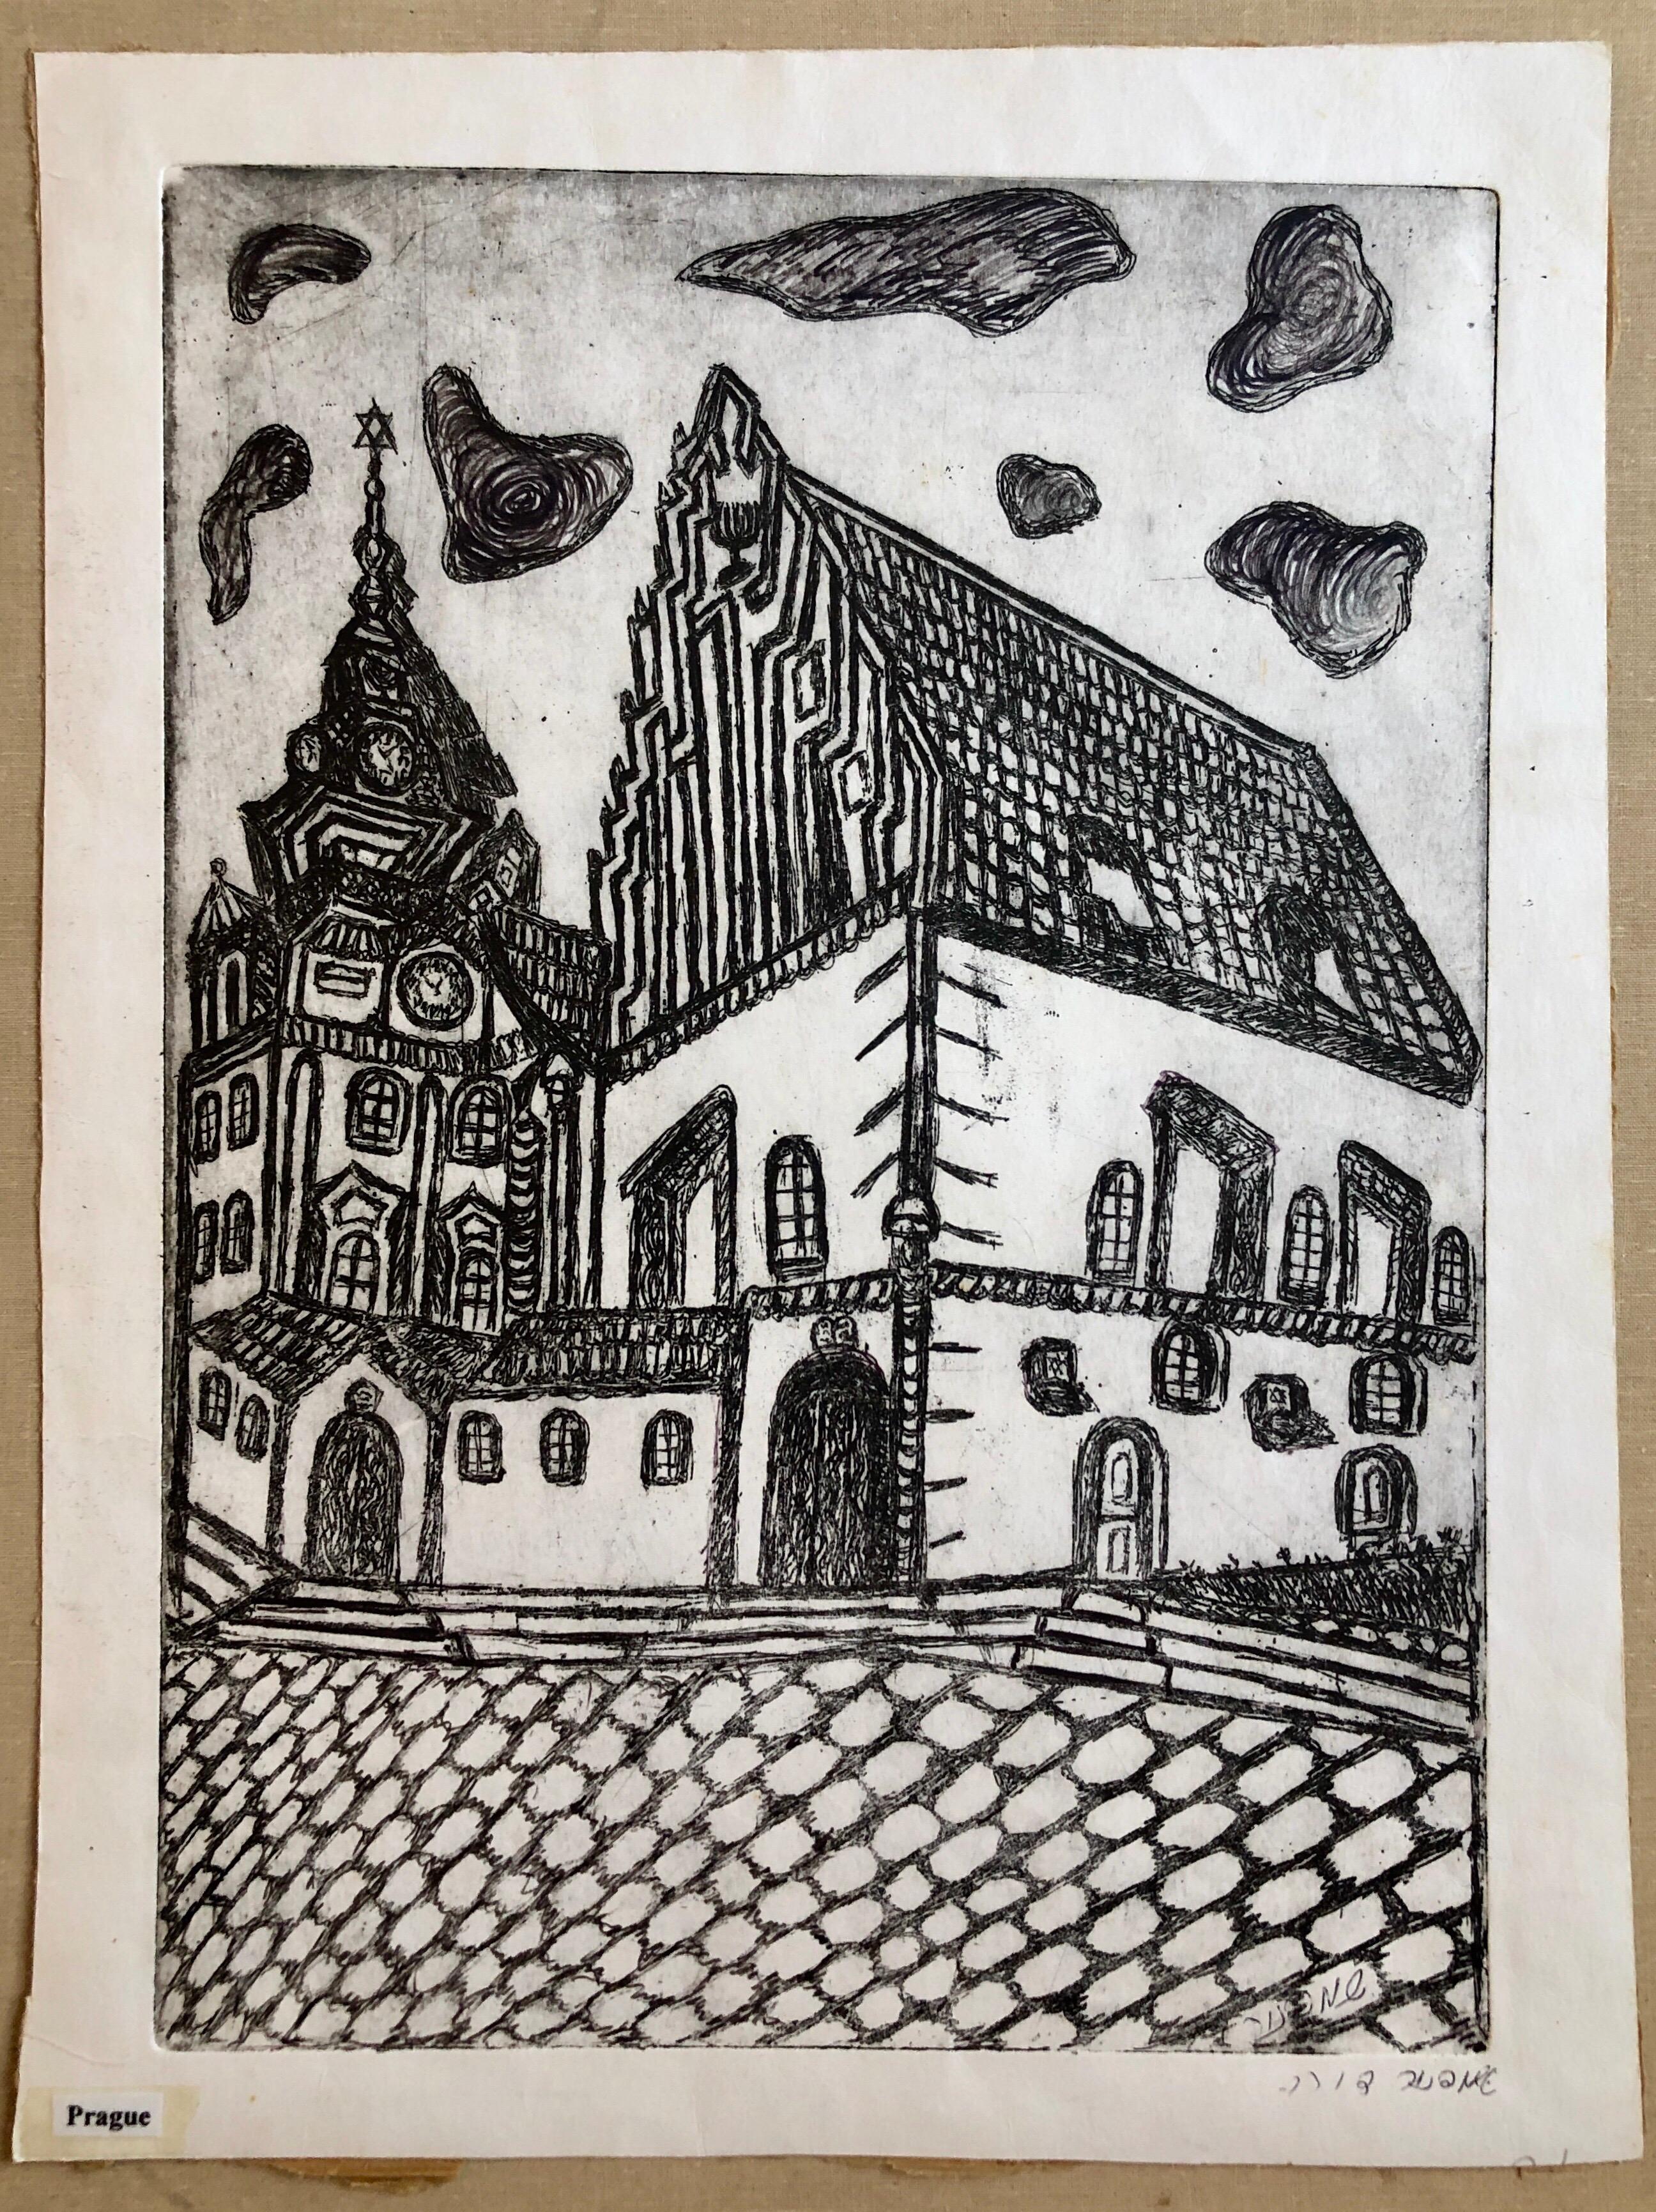 Altneuschul of the Maharal of Prague, Etching of Synagogue, Jewish temple. From very rare small edition. Most are signed in Hebrew and /or English. some are marked AP some are numbered. please see photos.
Dora Szampanier (Shampanier, nee Mondschein)